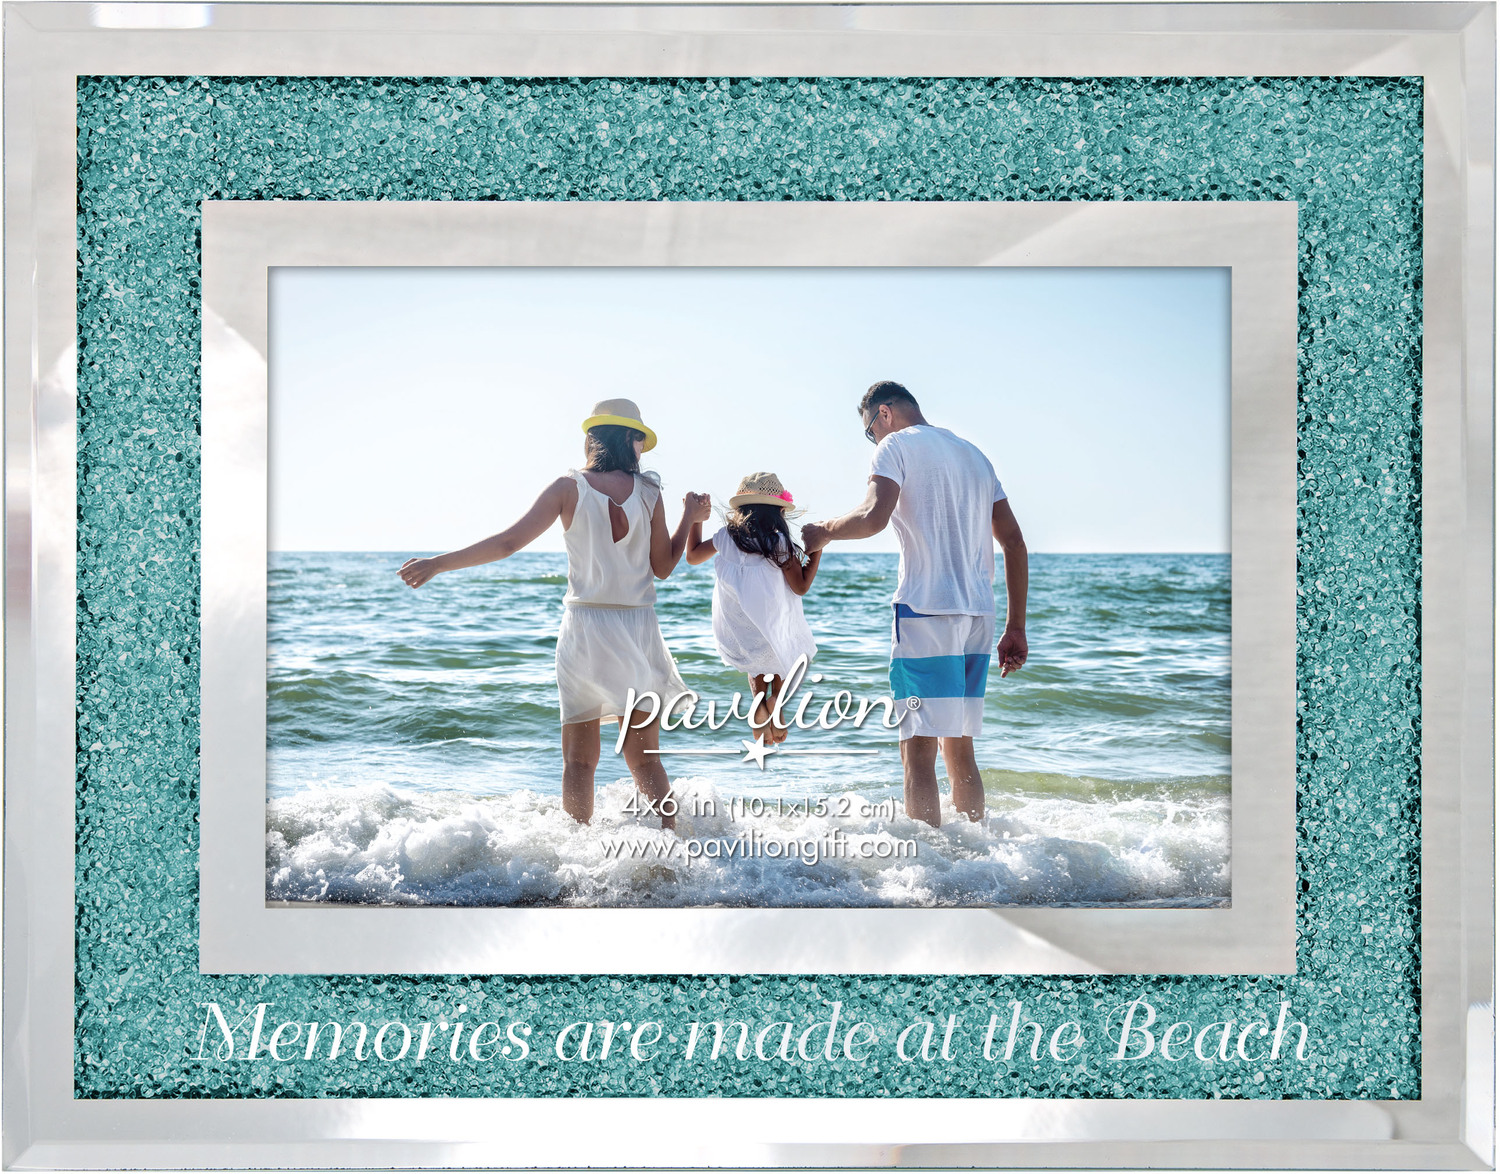 At The Beach by Glorious Occasions - At The Beach - 7.25" x 9.25" Frame (Holds  4" x 6" Photo)